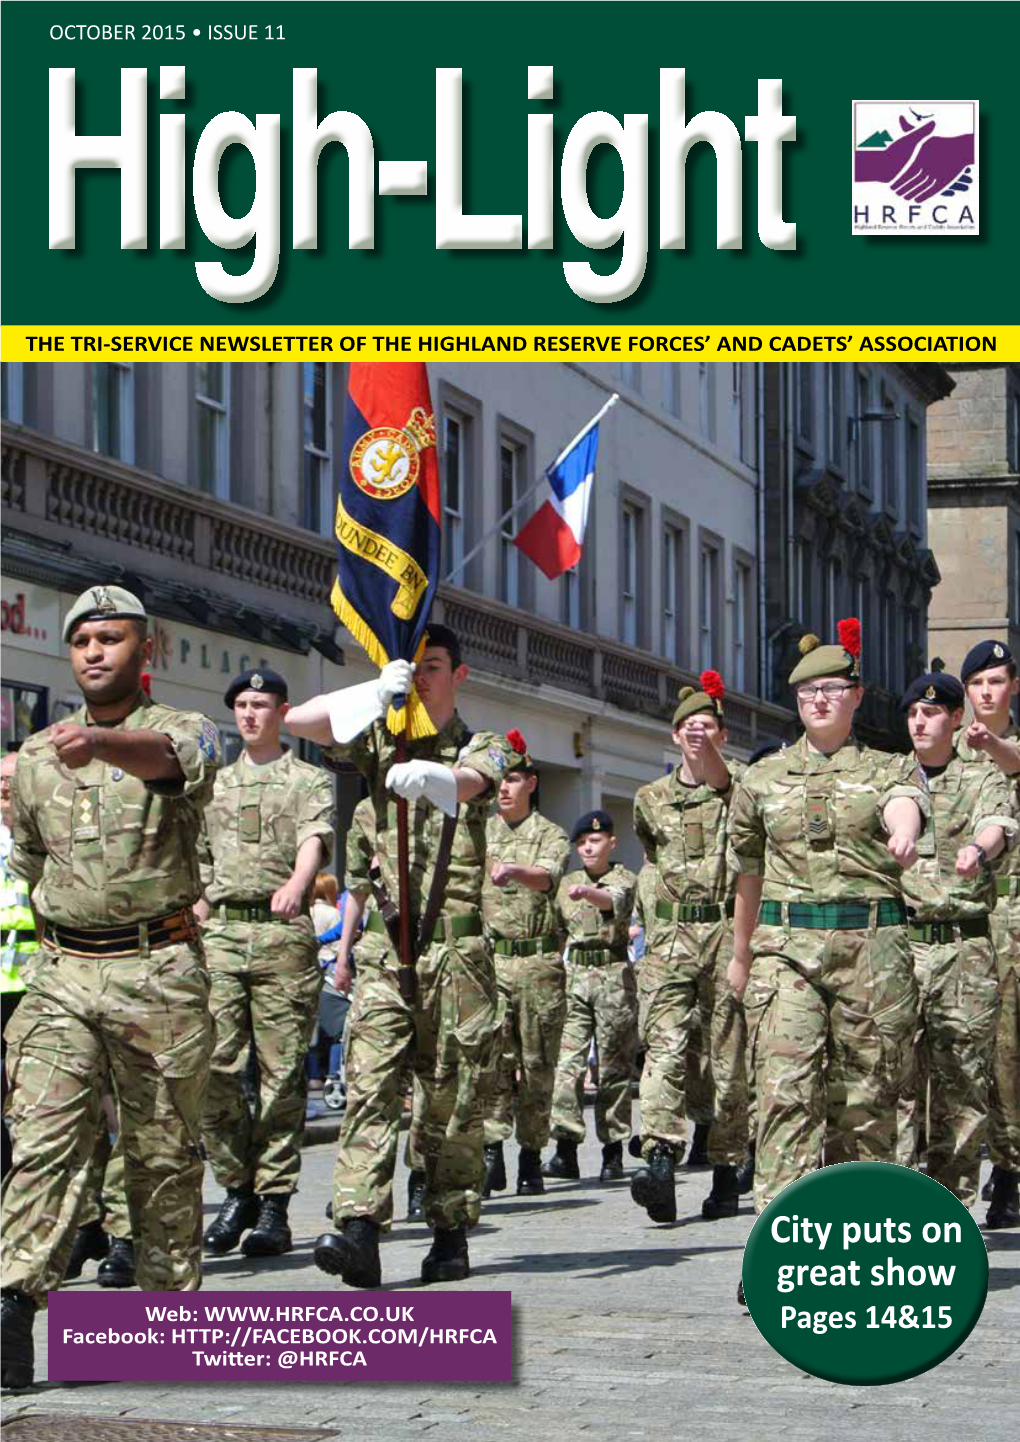 City Puts on Great Show Web: Pages 14&15 Facebook: Twitter: @HRFCA 2 | Editorial High-Light • Issue 11